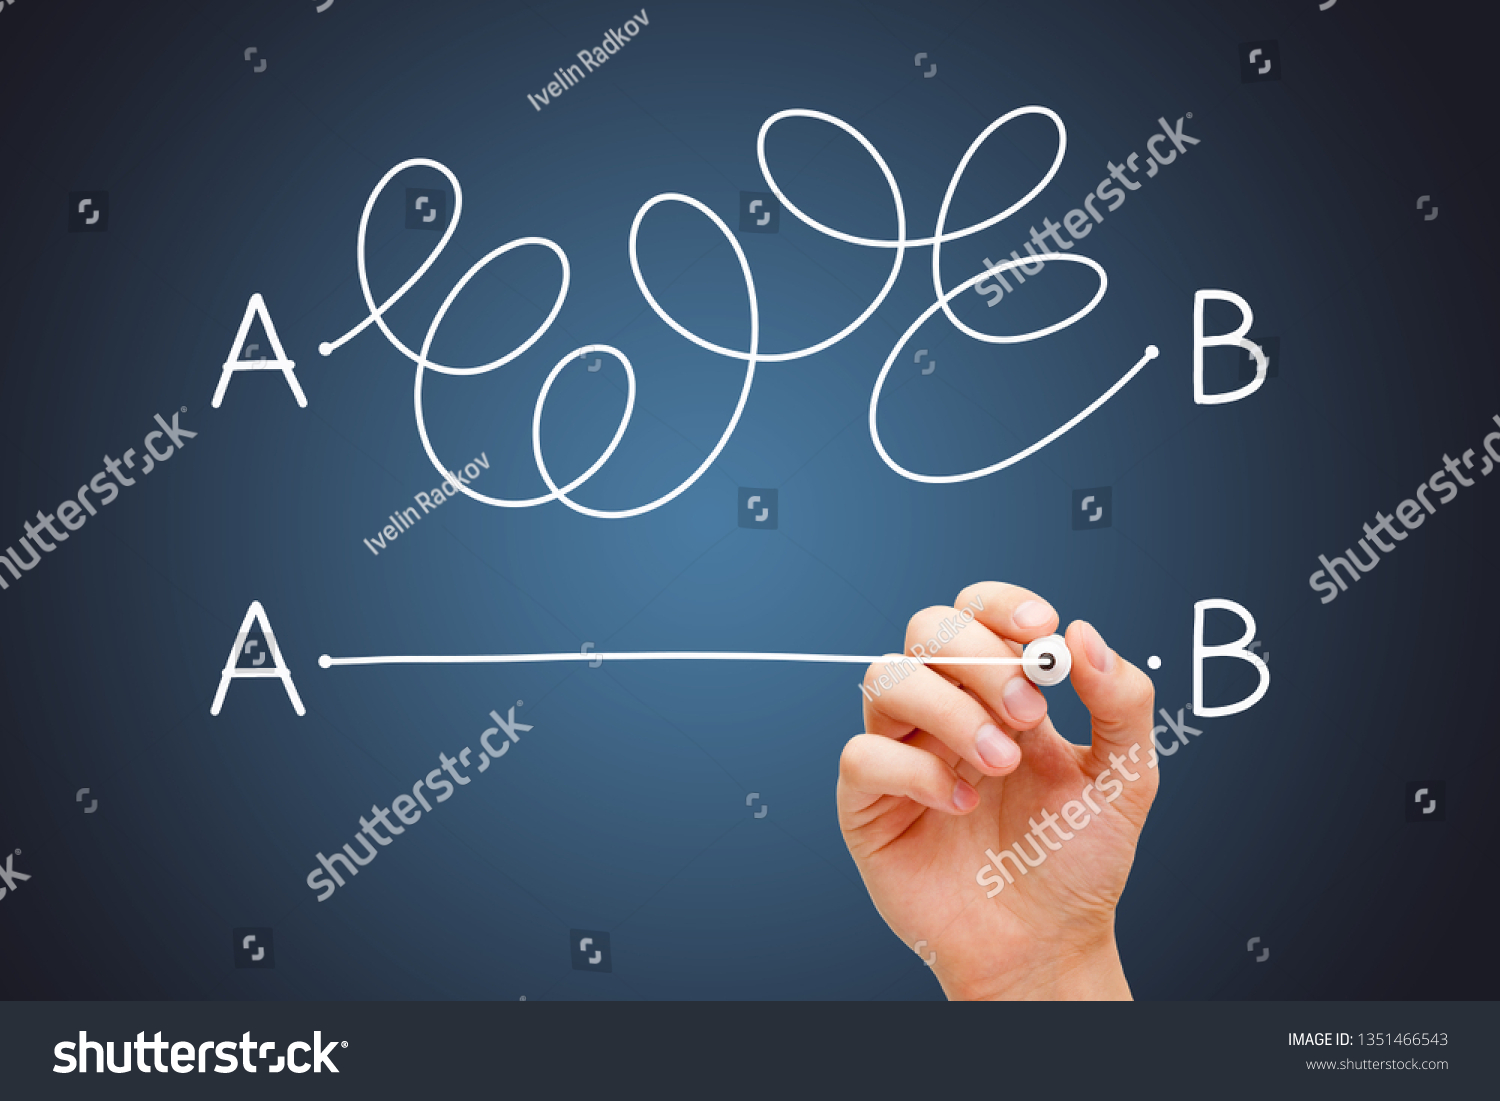 Hand drawing a conceptual diagram about the importance to find the shortest way to go from point A to point B, or a simple solution to a problem.  #1351466543